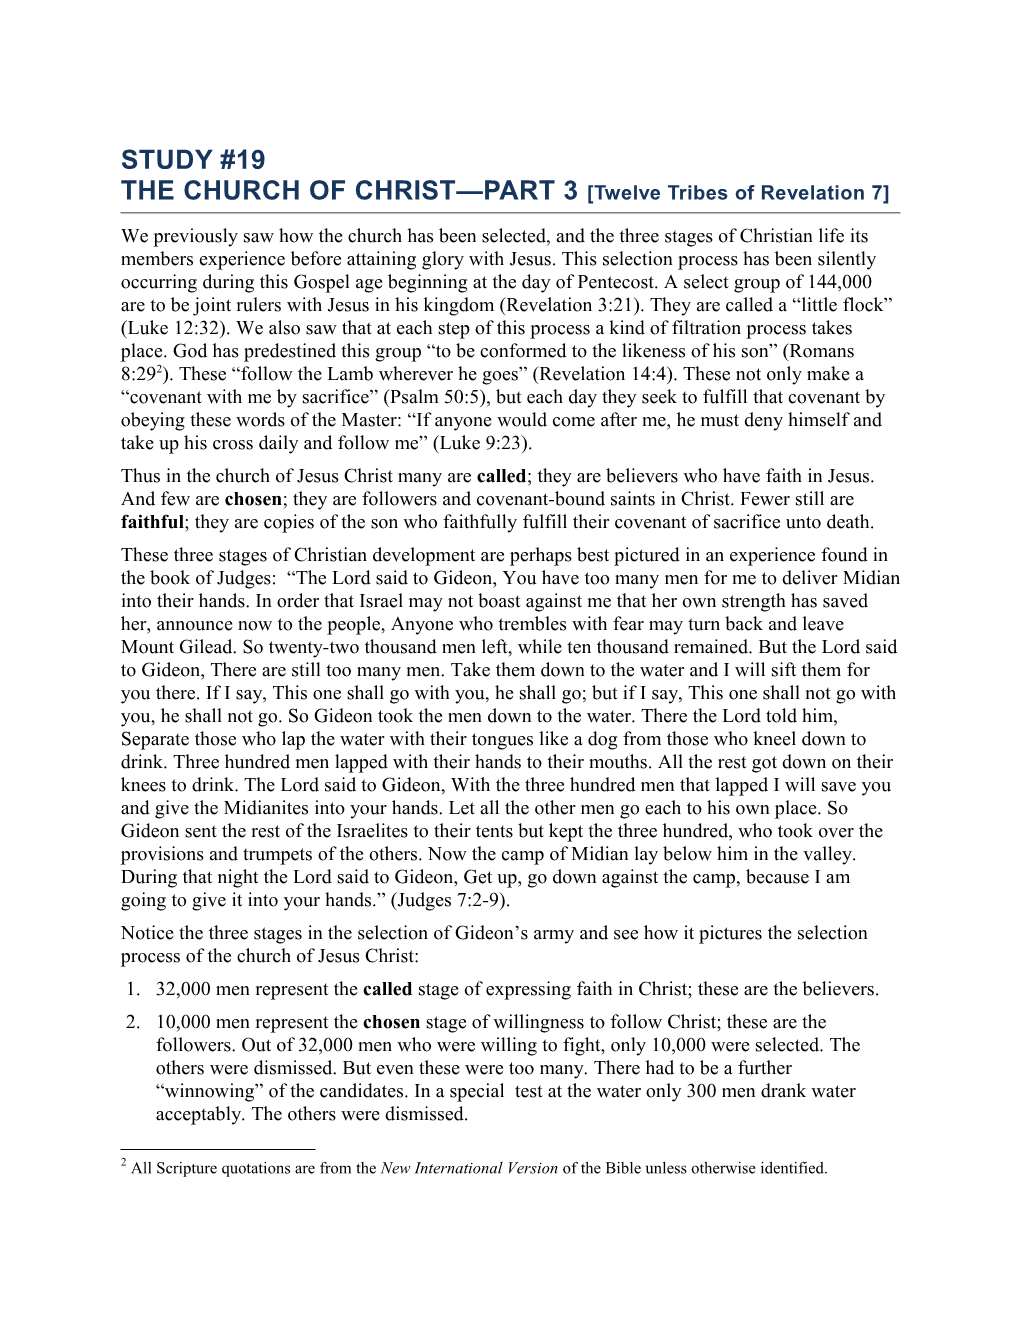 STUDY#19 the CHURCH of CHRIST PART 3 Twelve Tribes of Revelation 7